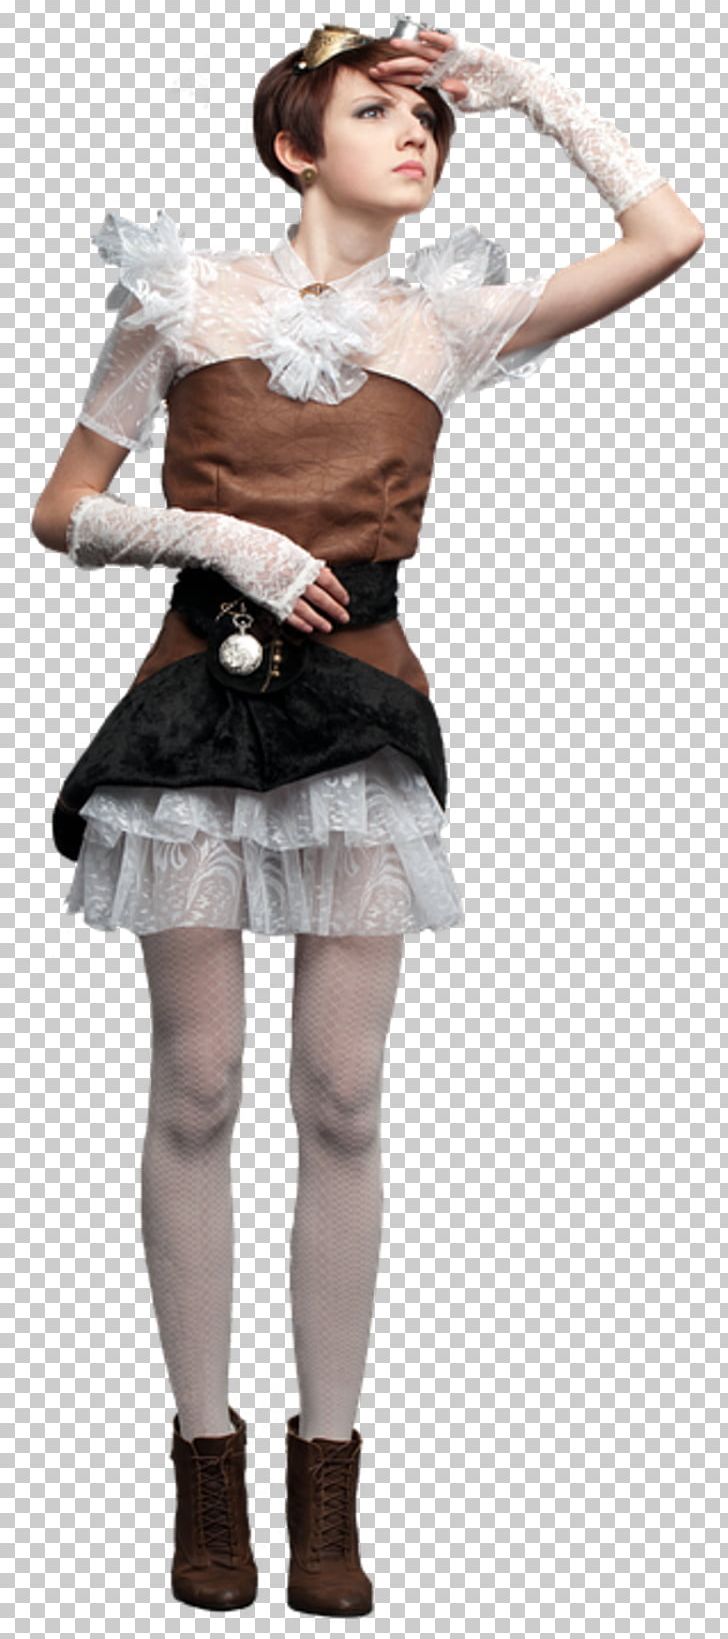 Steampunk Fashion Costume Clothing PNG, Clipart, Clothing, Costume, Fashion, Fashion Model, Femme Free PNG Download